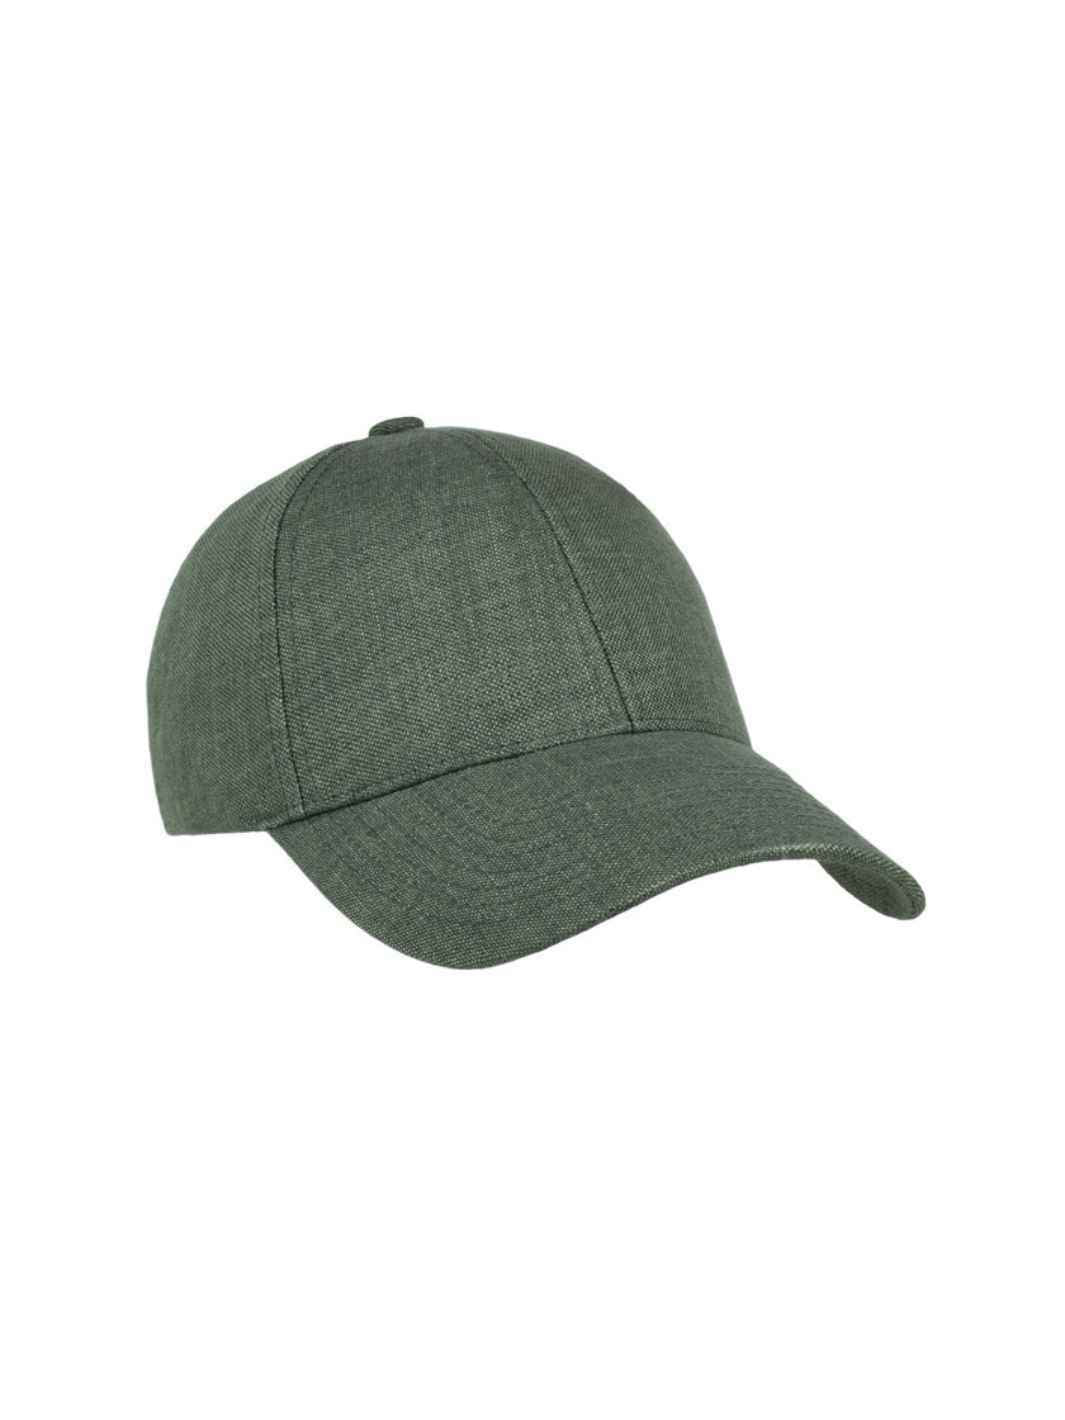 Varsity Headwear Accessories Cap | French Olive Linen